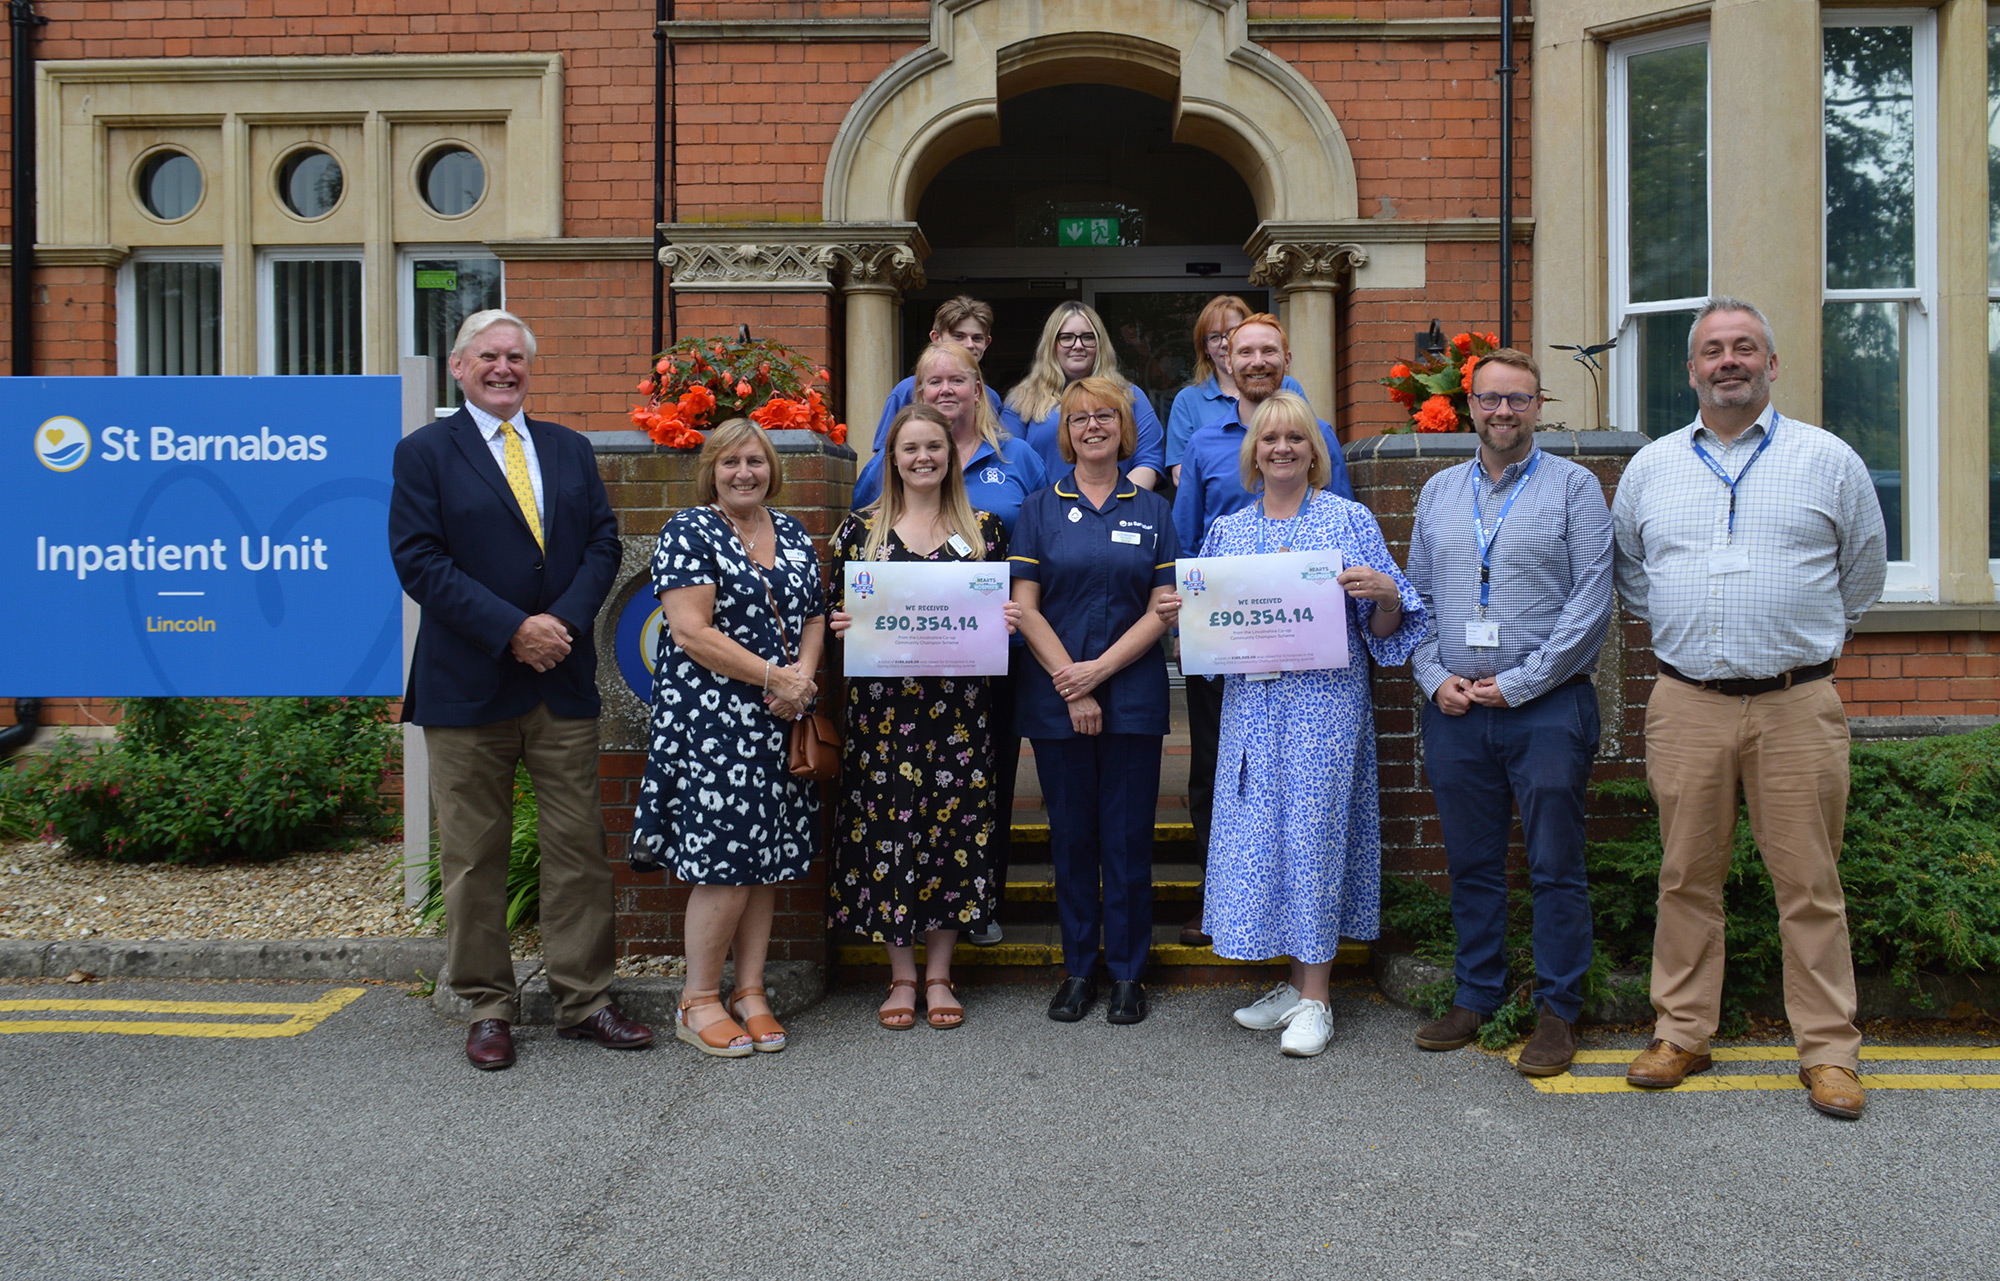 Group of people standing in front of the St Barnabas Inpatient Unit in Lincoln, holding signs with donation from Lincolnshire Co-op.